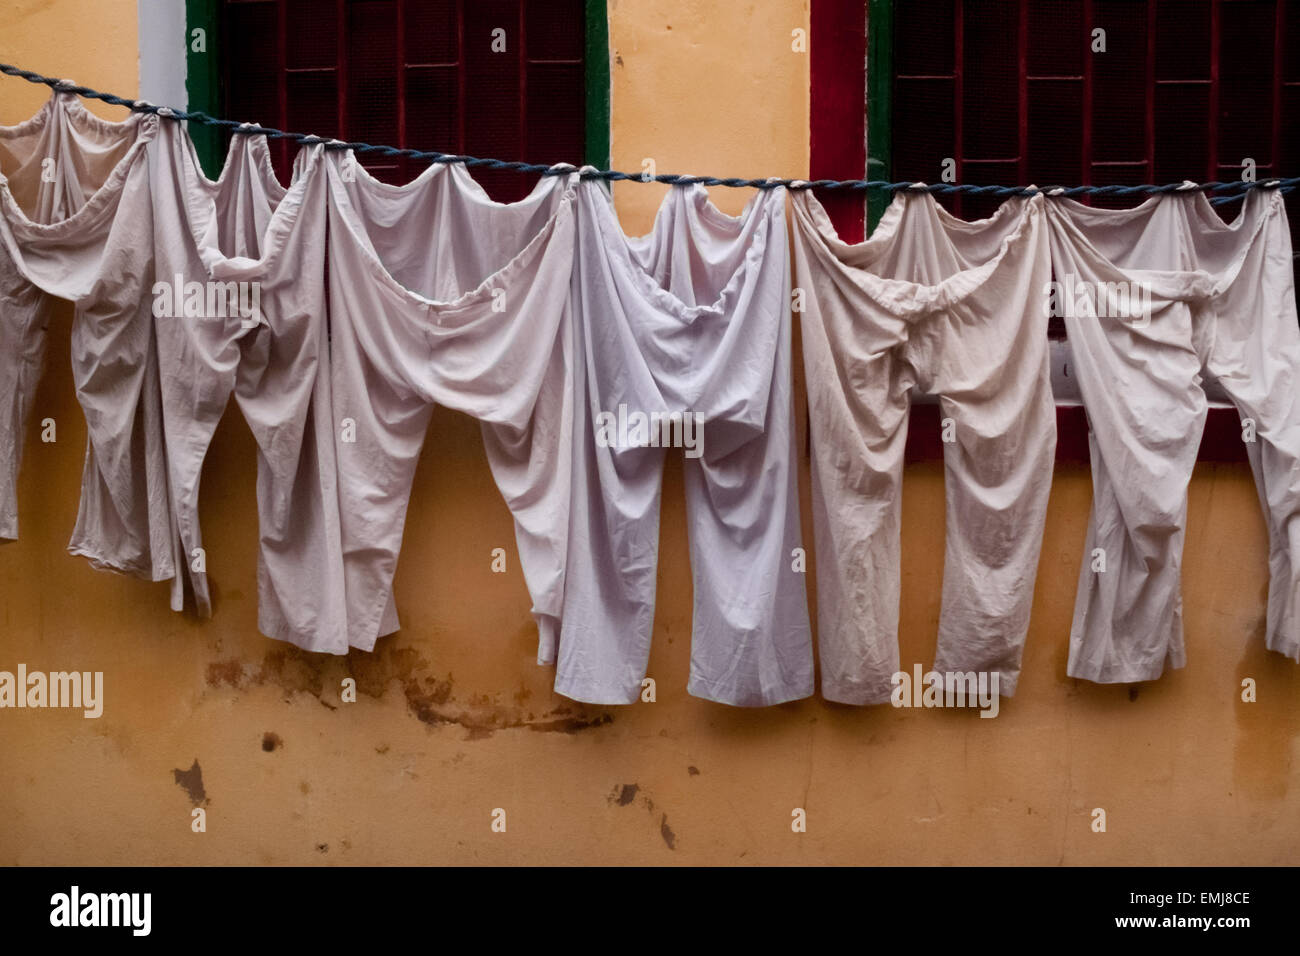 Laundered pants are dried, hung on a wall in Kolkata, West Bengal, India. Stock Photo